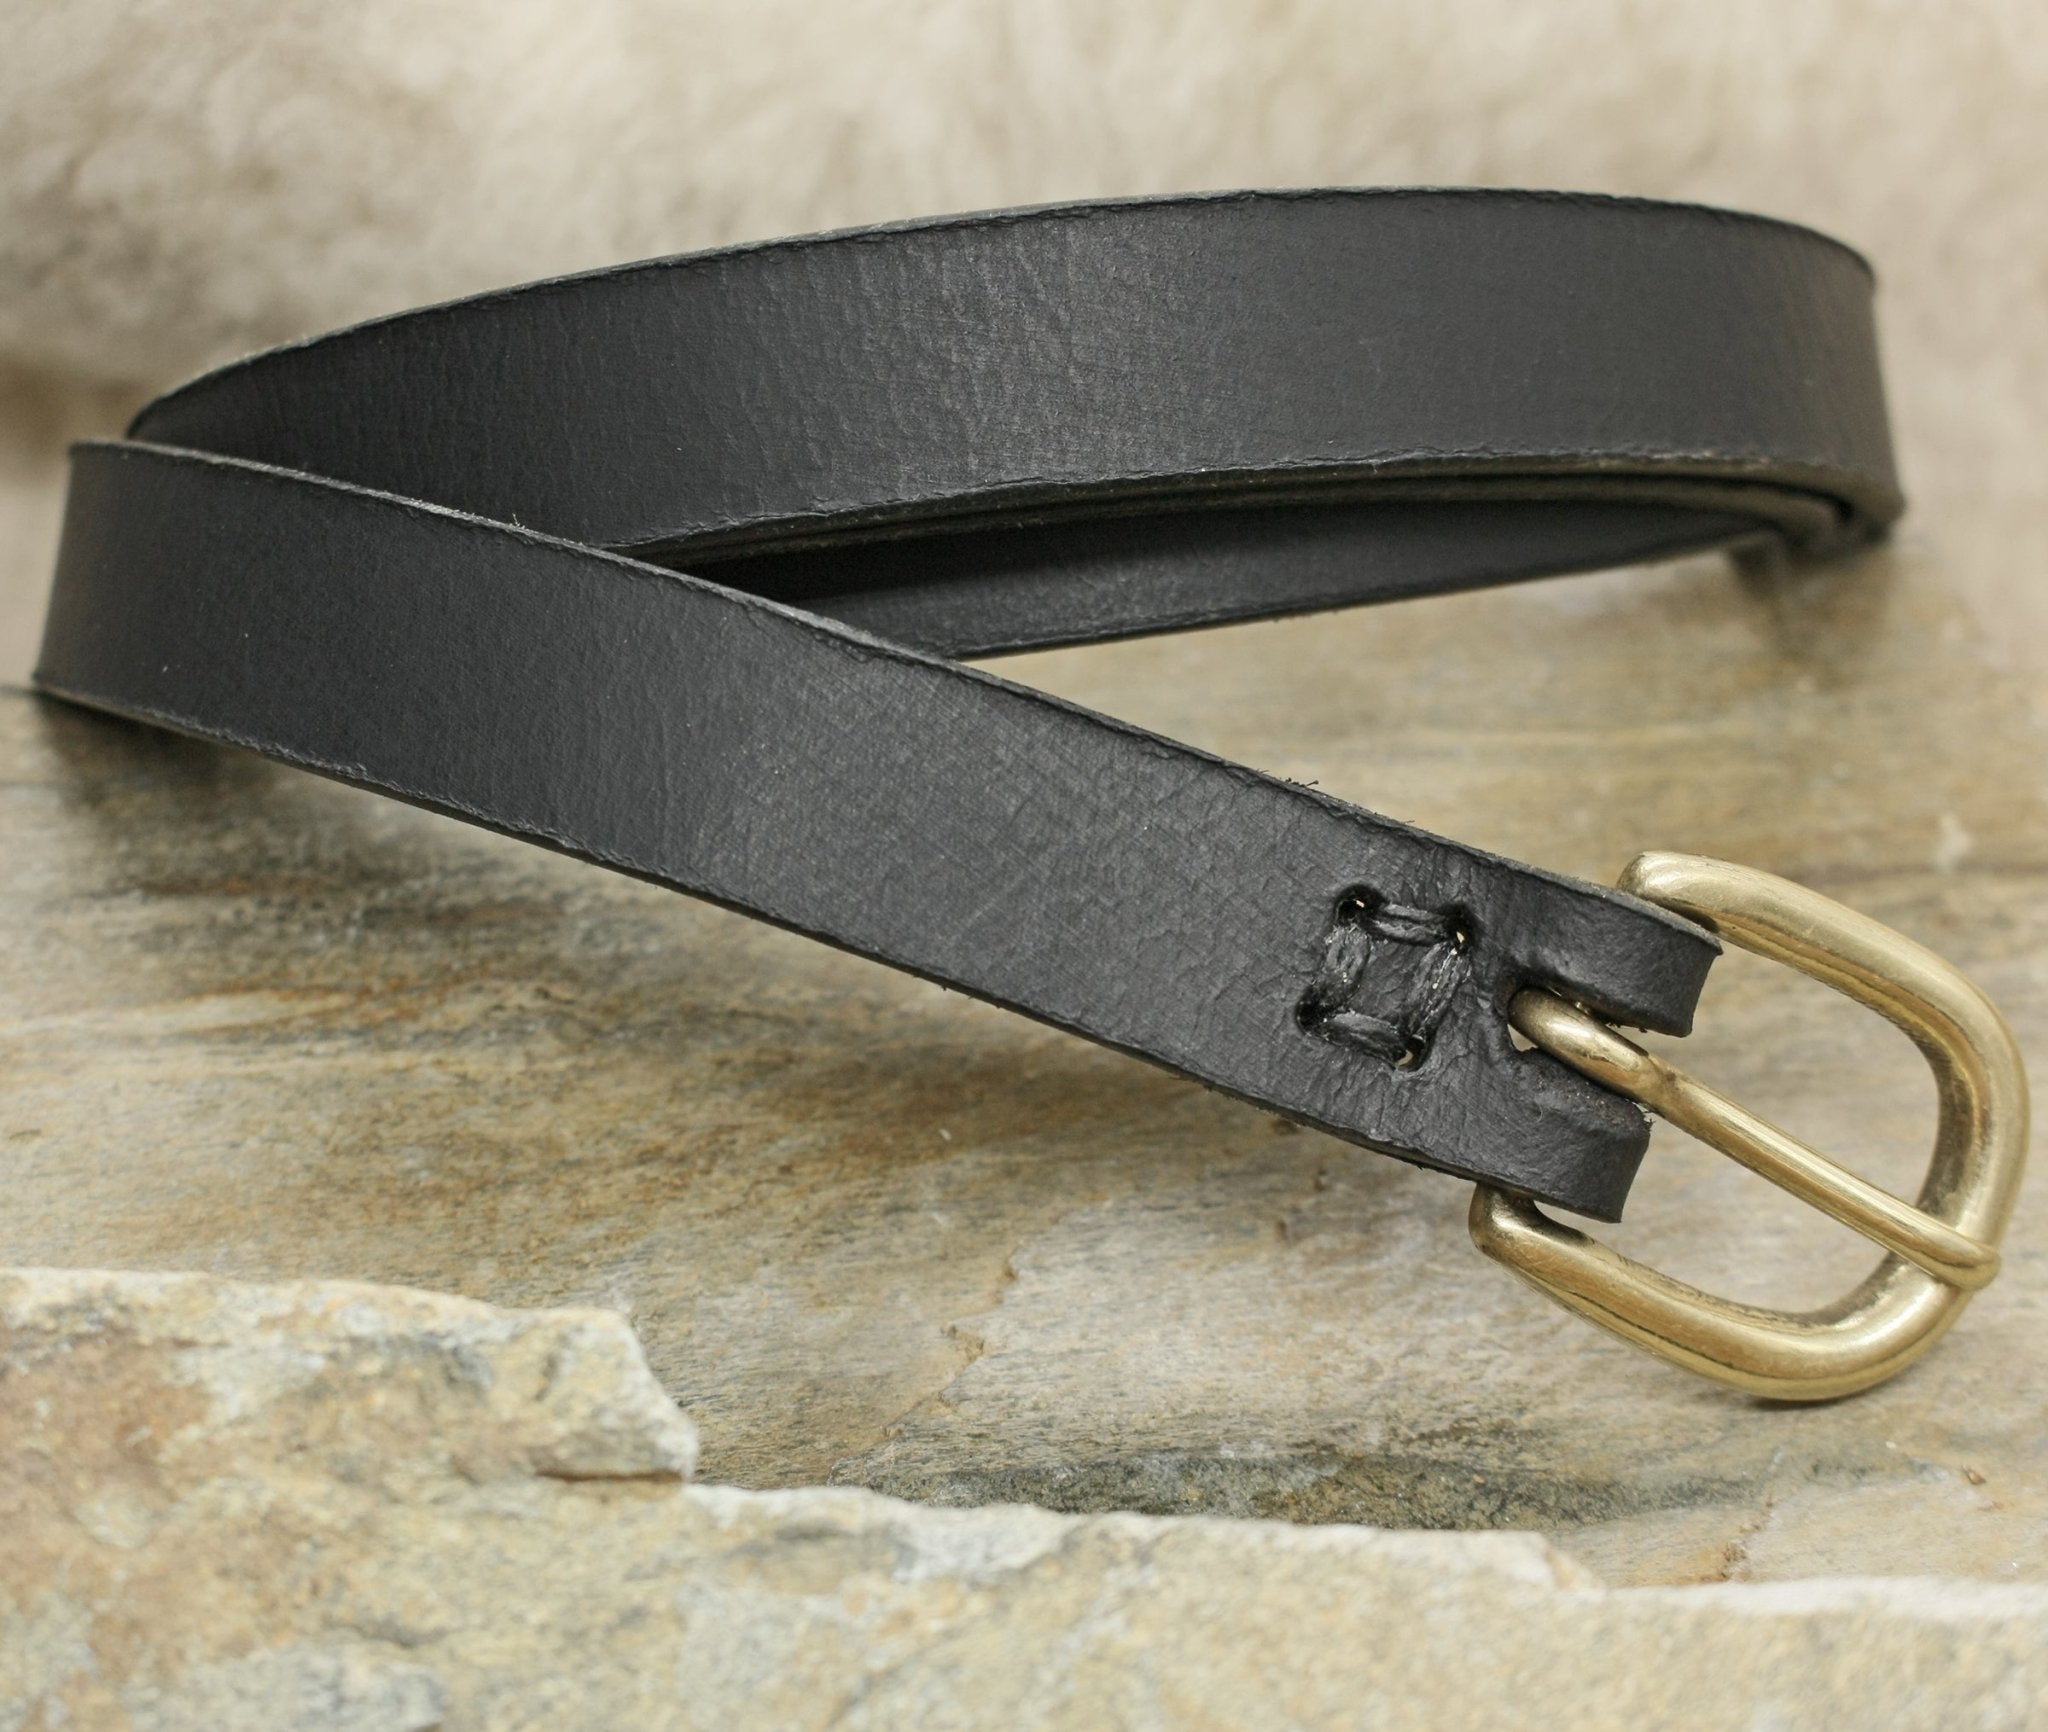 Black 19mm Wide Leather Viking Belt with Brass Buckle on Rock